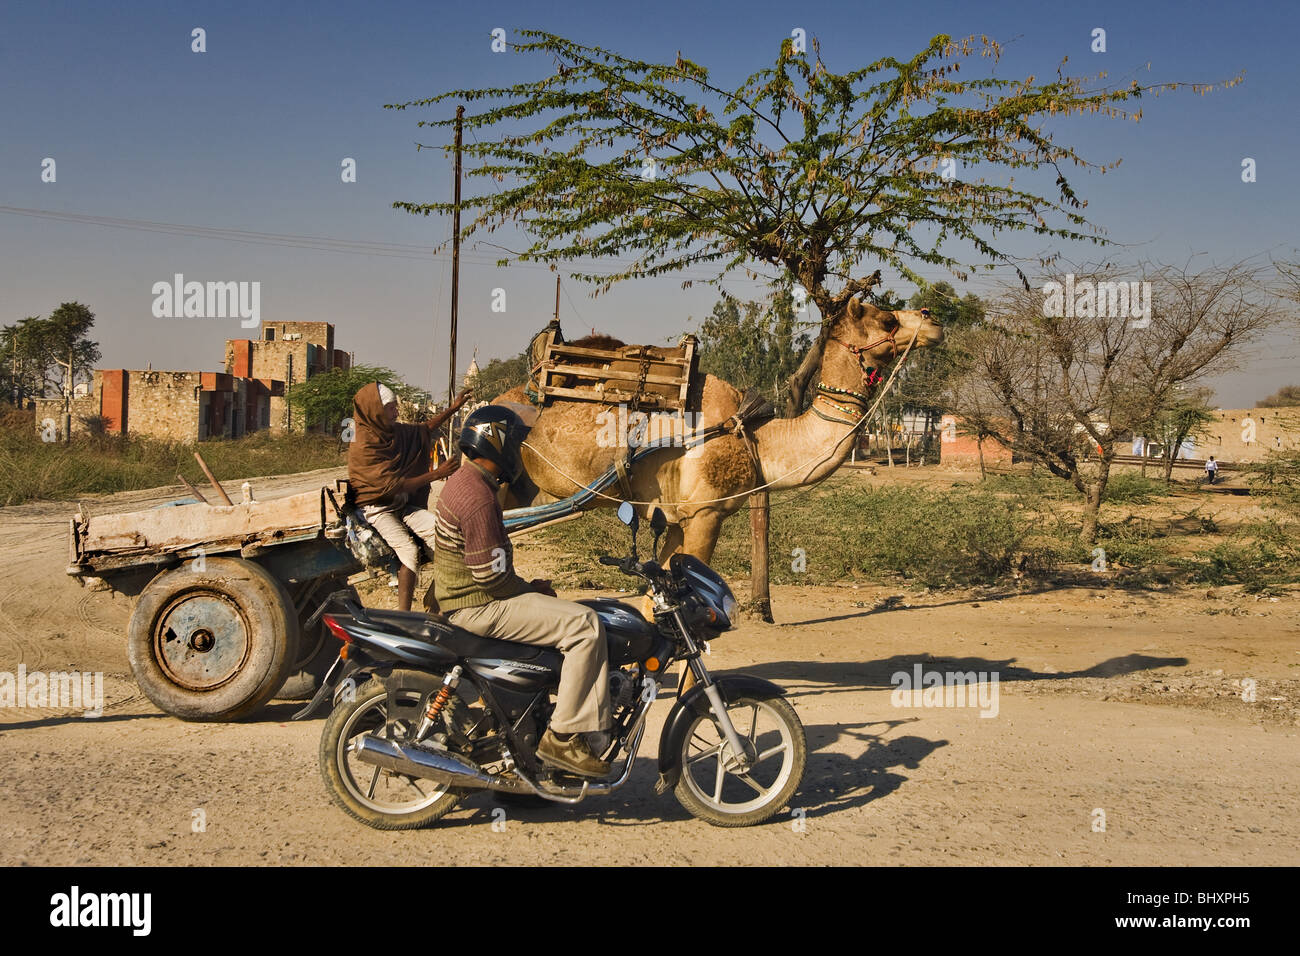 camel and a motorbike on a street, North India, India, Asia Stock Photo